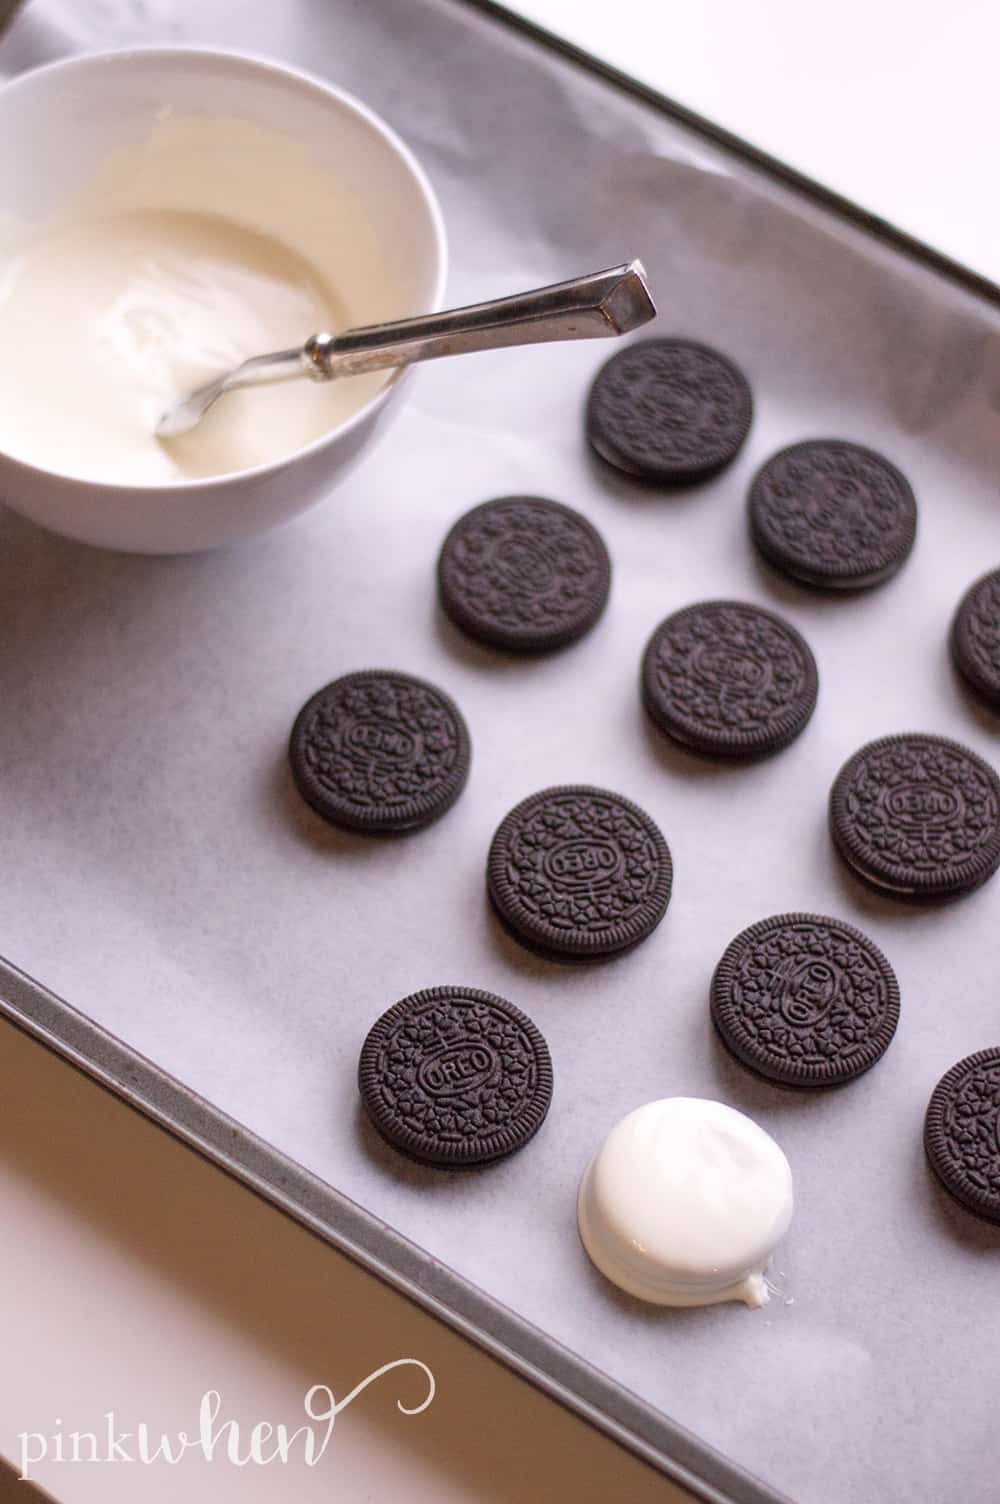 This is a newly loved easy no bake dessert recipe - with a fun twist on OREO cookies that kids will love! These sweet lamb OREO cookies are so sweet, fun, and delicious! These easy no bake OREO cookies will be an absolute hit with the kids!